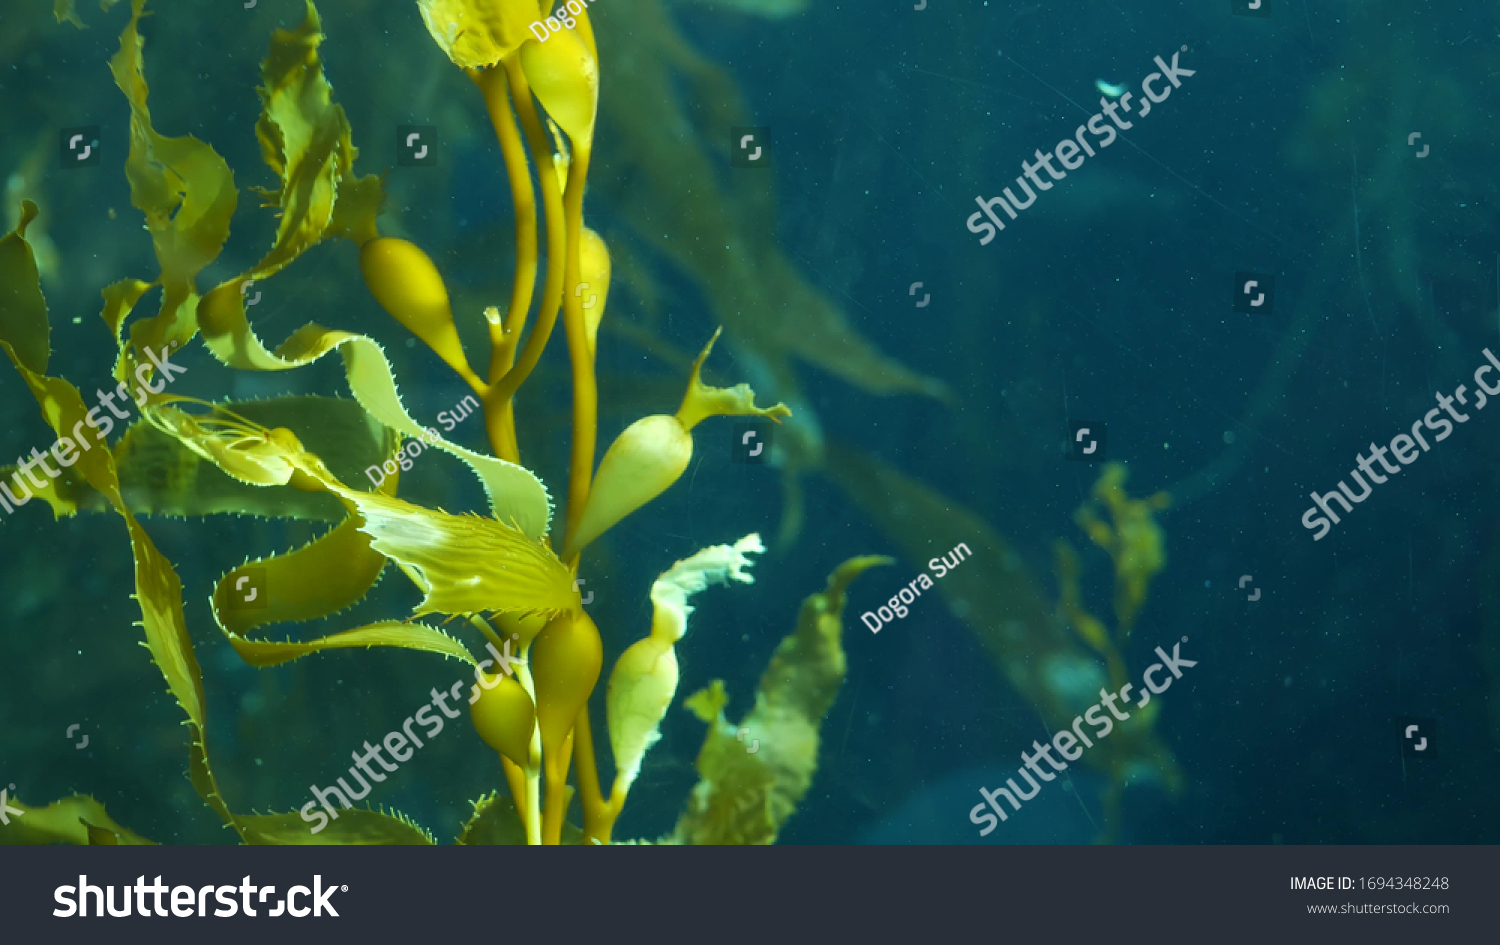 Light rays filter through a Giant Kelp forest. Macrocystis pyrifera. Diving, Aquarium and Marine concept. Underwater close up of swaying Seaweed leaves. Sunlight pierces vibrant exotic Ocean plants. #1694348248